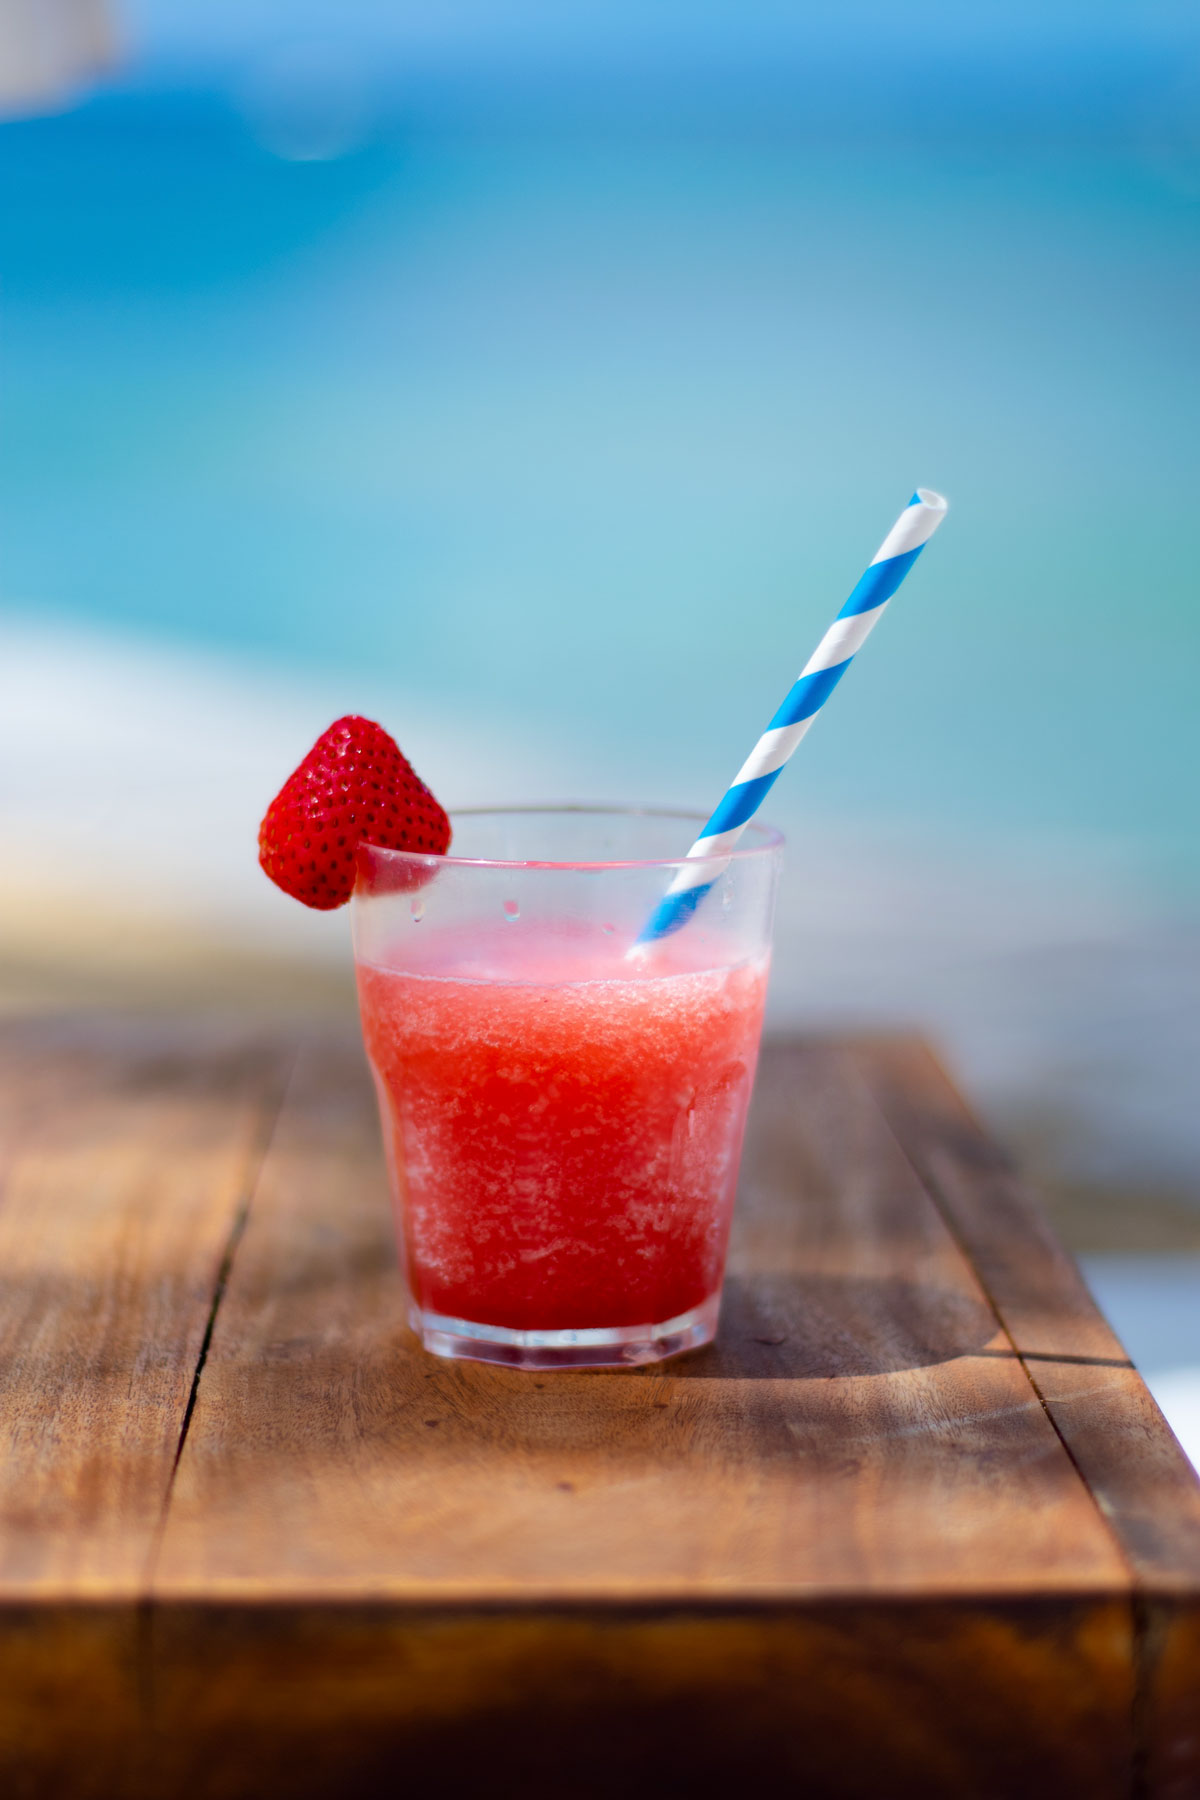 Daiquiri Rum Drinks That Will Impress Your Guests